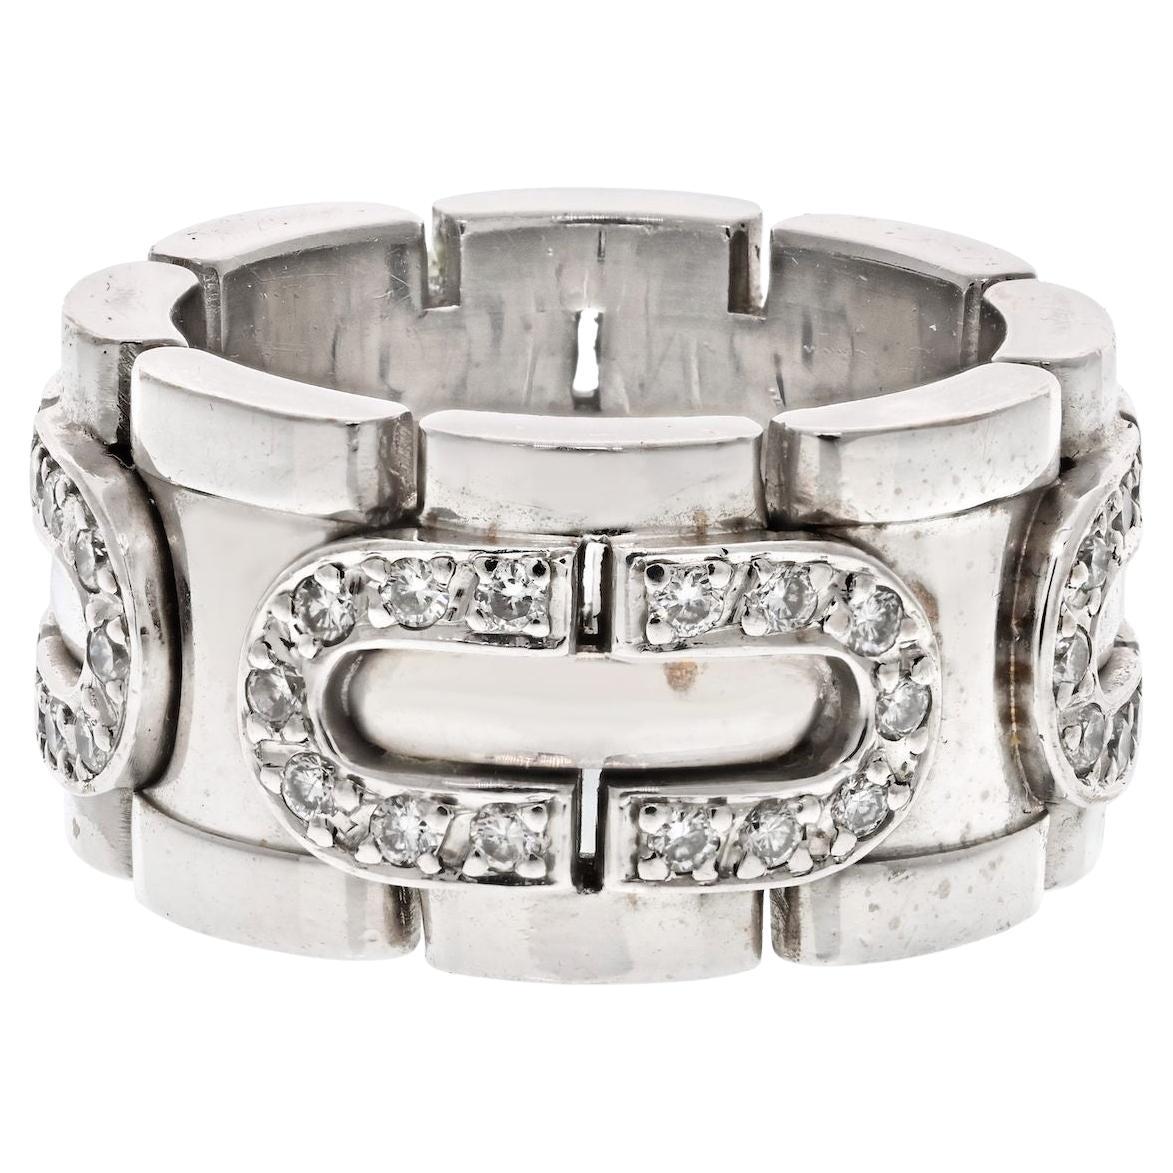 Cartier 18K White Gold Panthere Maillon Diamond Ring